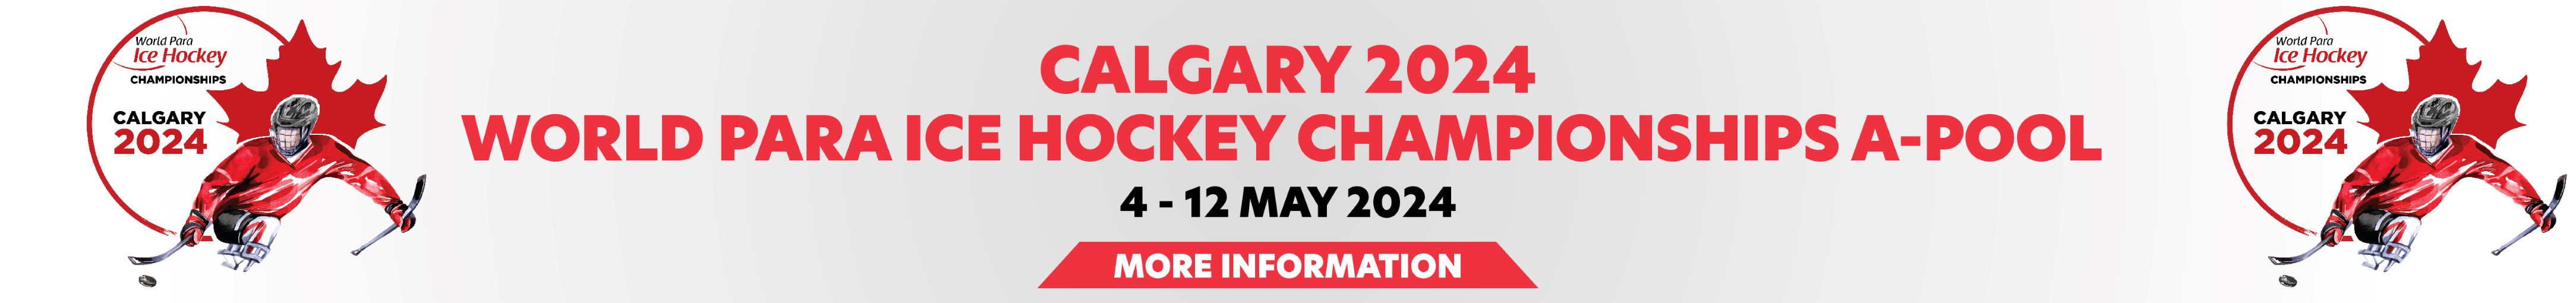 A banner of the Calgary 2024 More Information